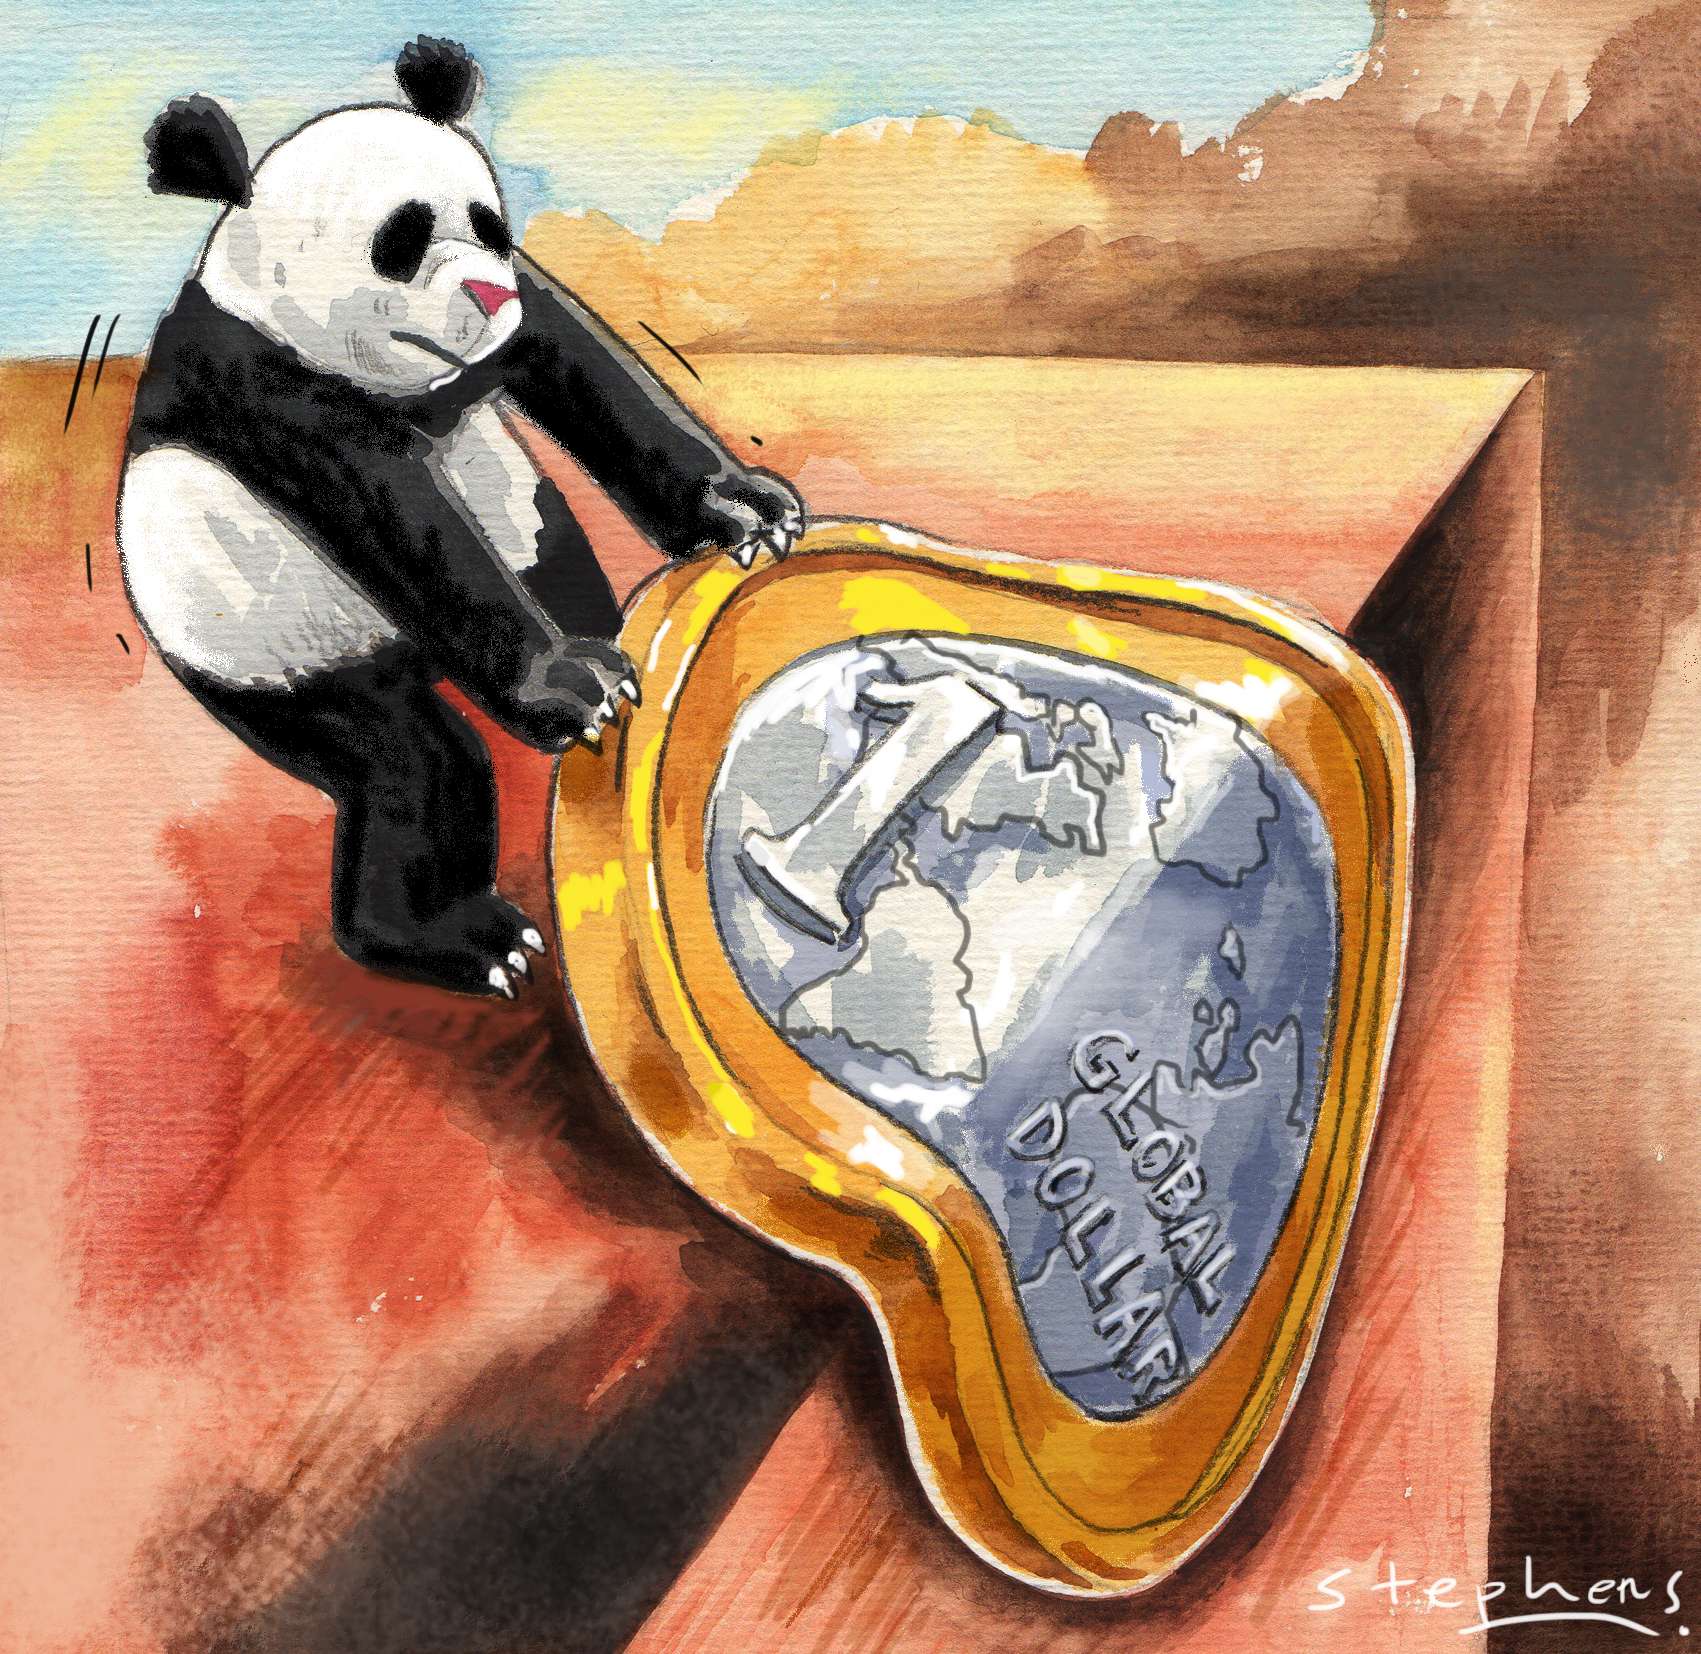 Brian Moore says the key role China, as a holder of substantial US securities, played to stabilise the global economy should be acknowledged, and such positive conduct encouraged